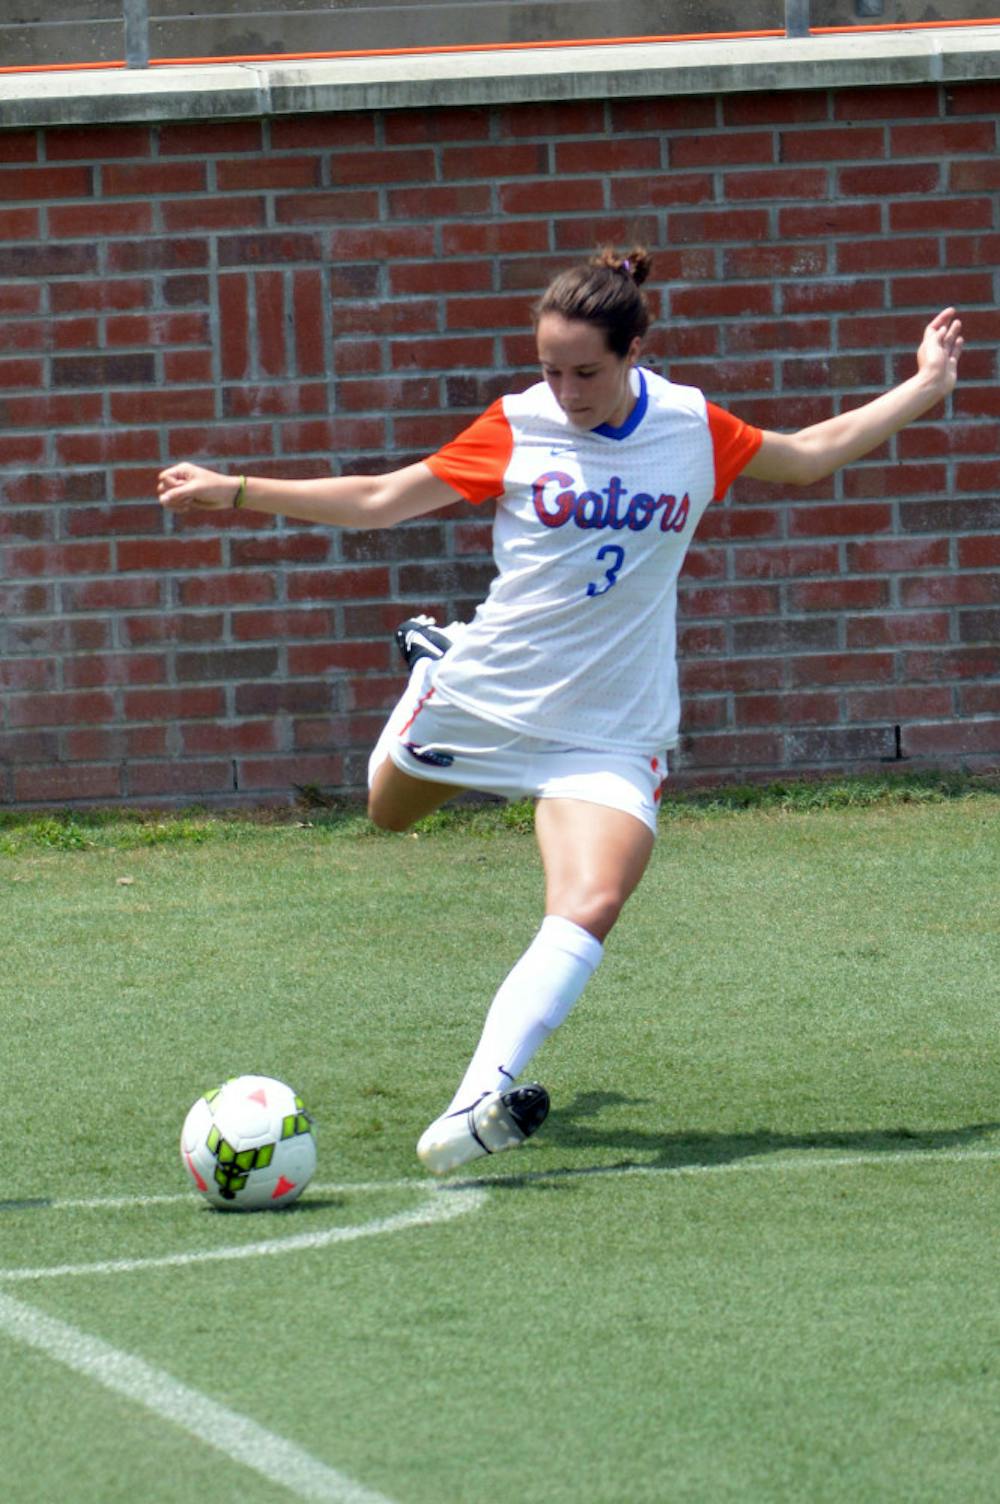 <p>Brooke Smith kicks a corner kick during Florida's 2-0 win against South Florida at Donald R. Dizney Stadium. Smith was one of four Gators to score a goal in Florida's 4-0 win against Oklahoma State on Sunday.</p>